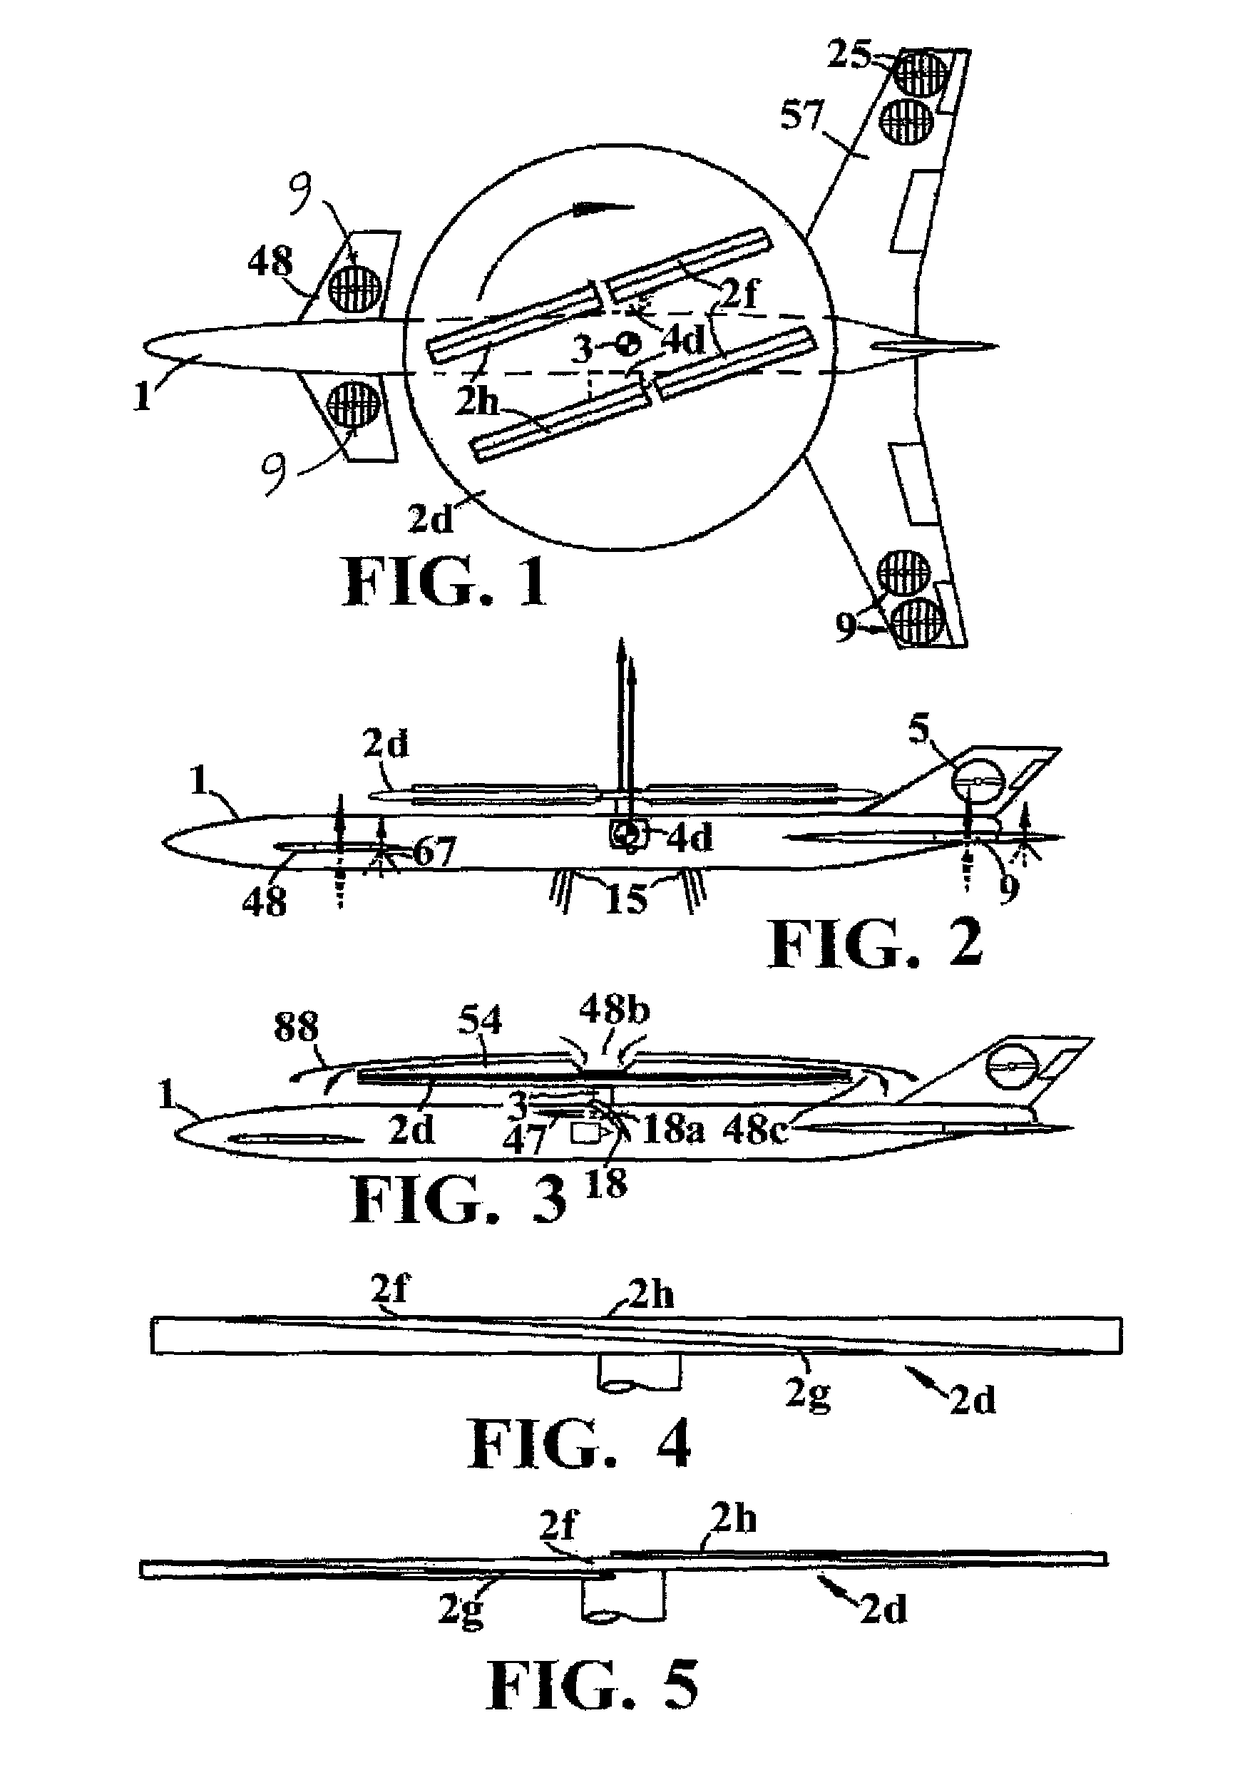 Lift propulsion and stabilizing system and procedure for vertical take-off and landing aircraft